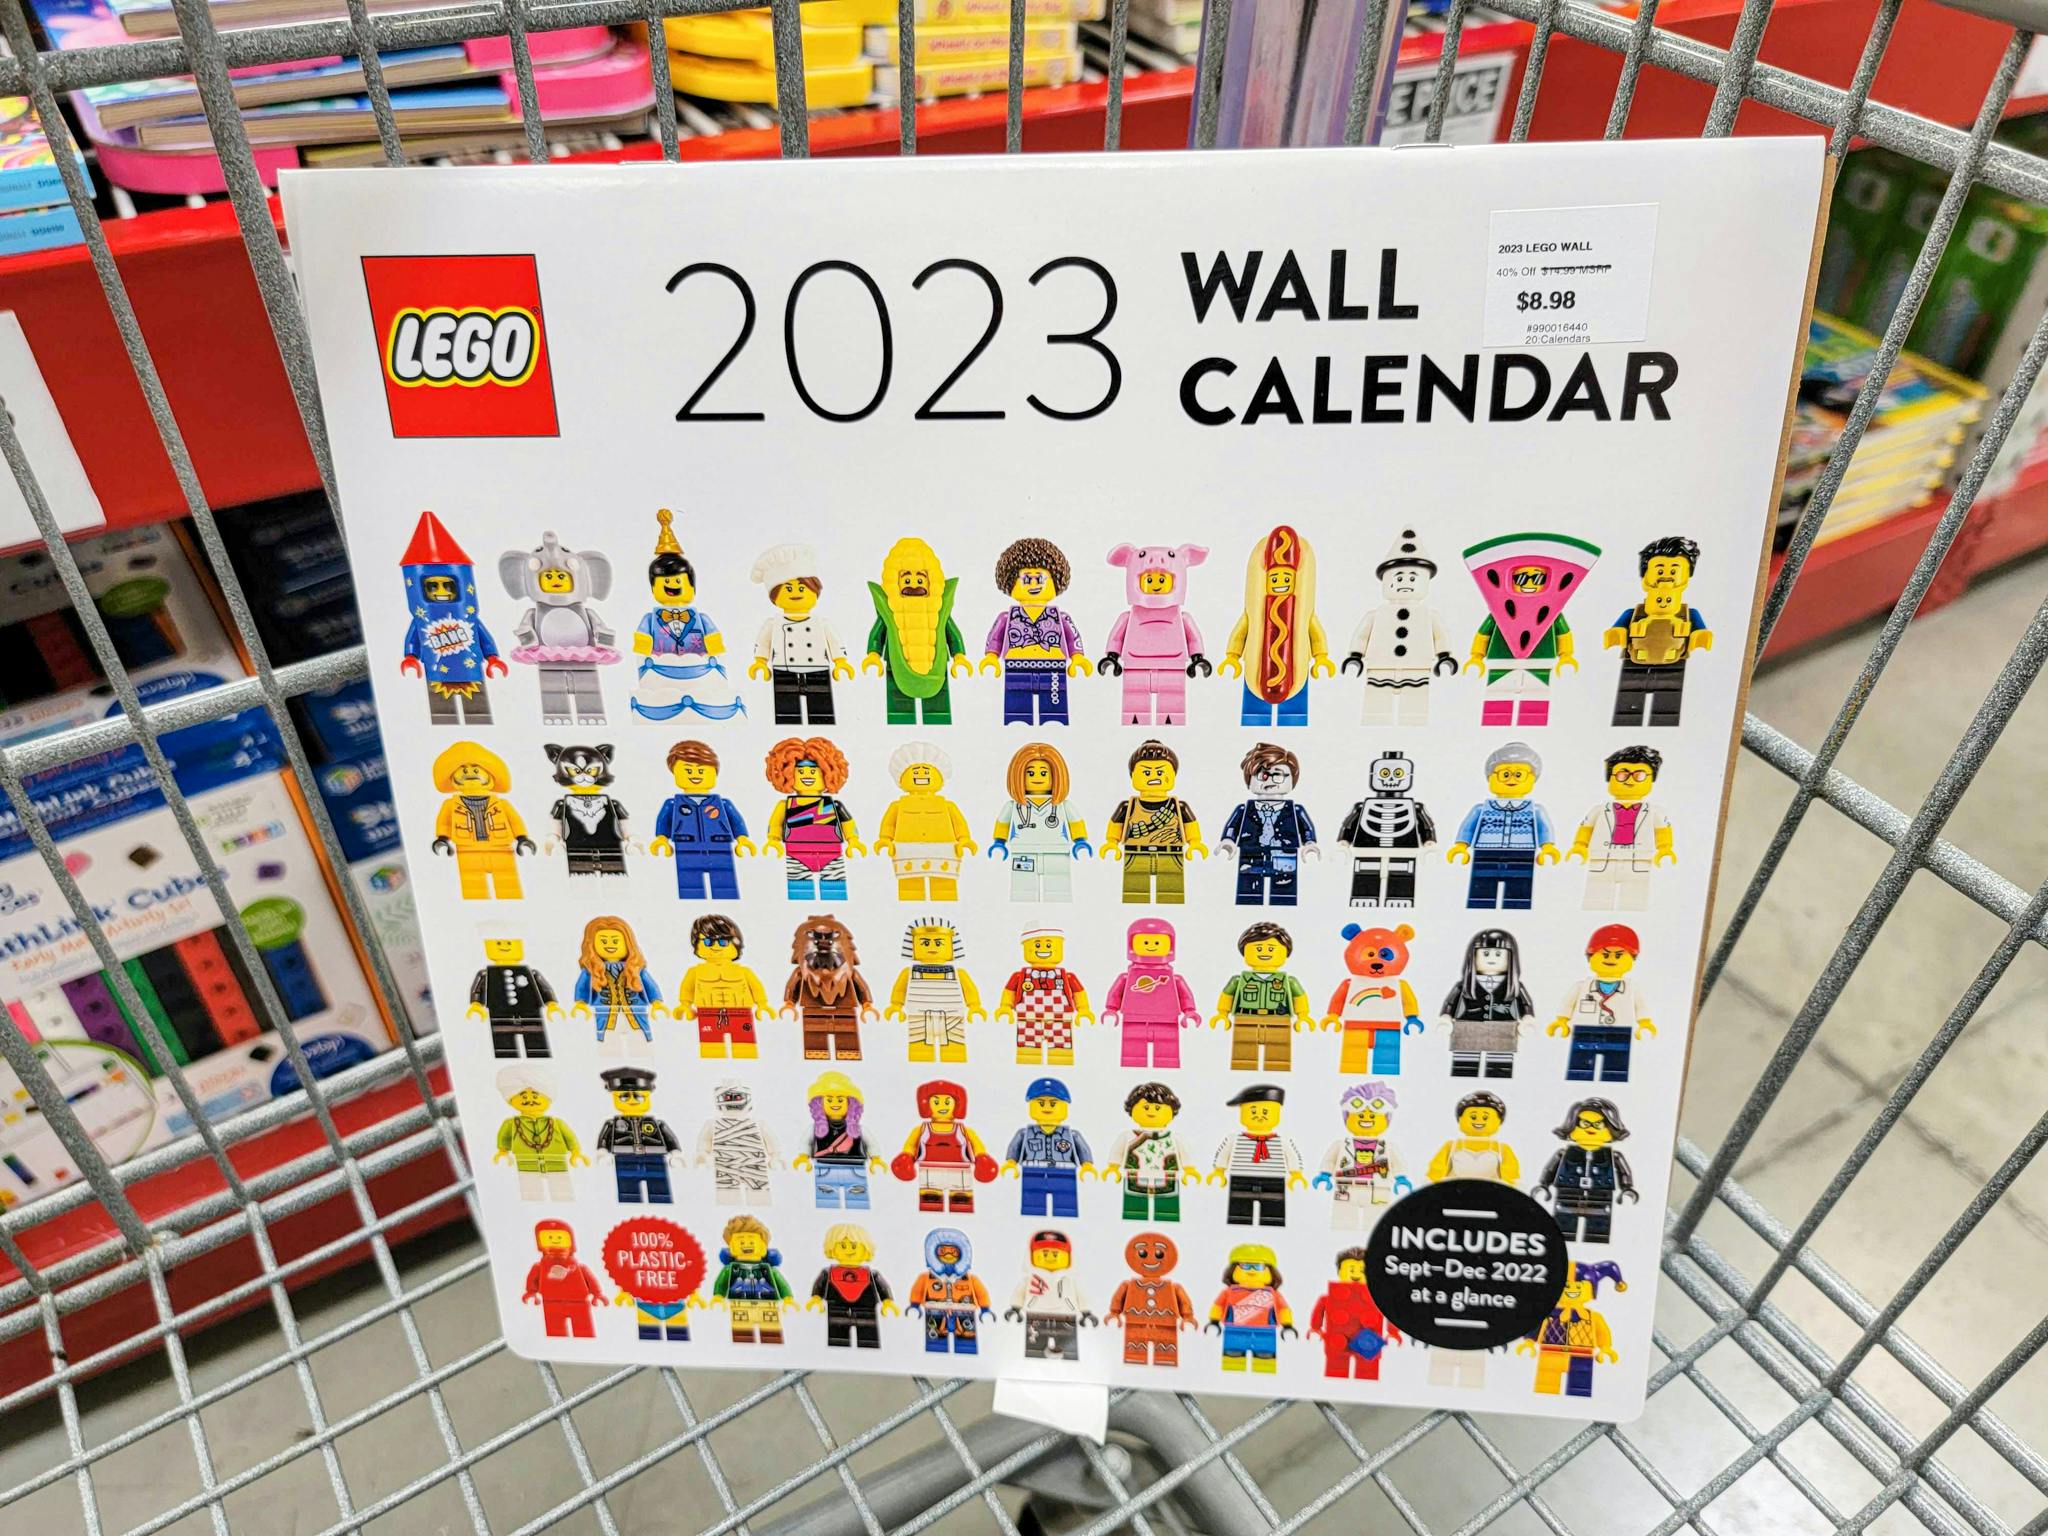 2023 Lego Wall Calendar, Only 8.98 at Sam's Club The Krazy Coupon Lady